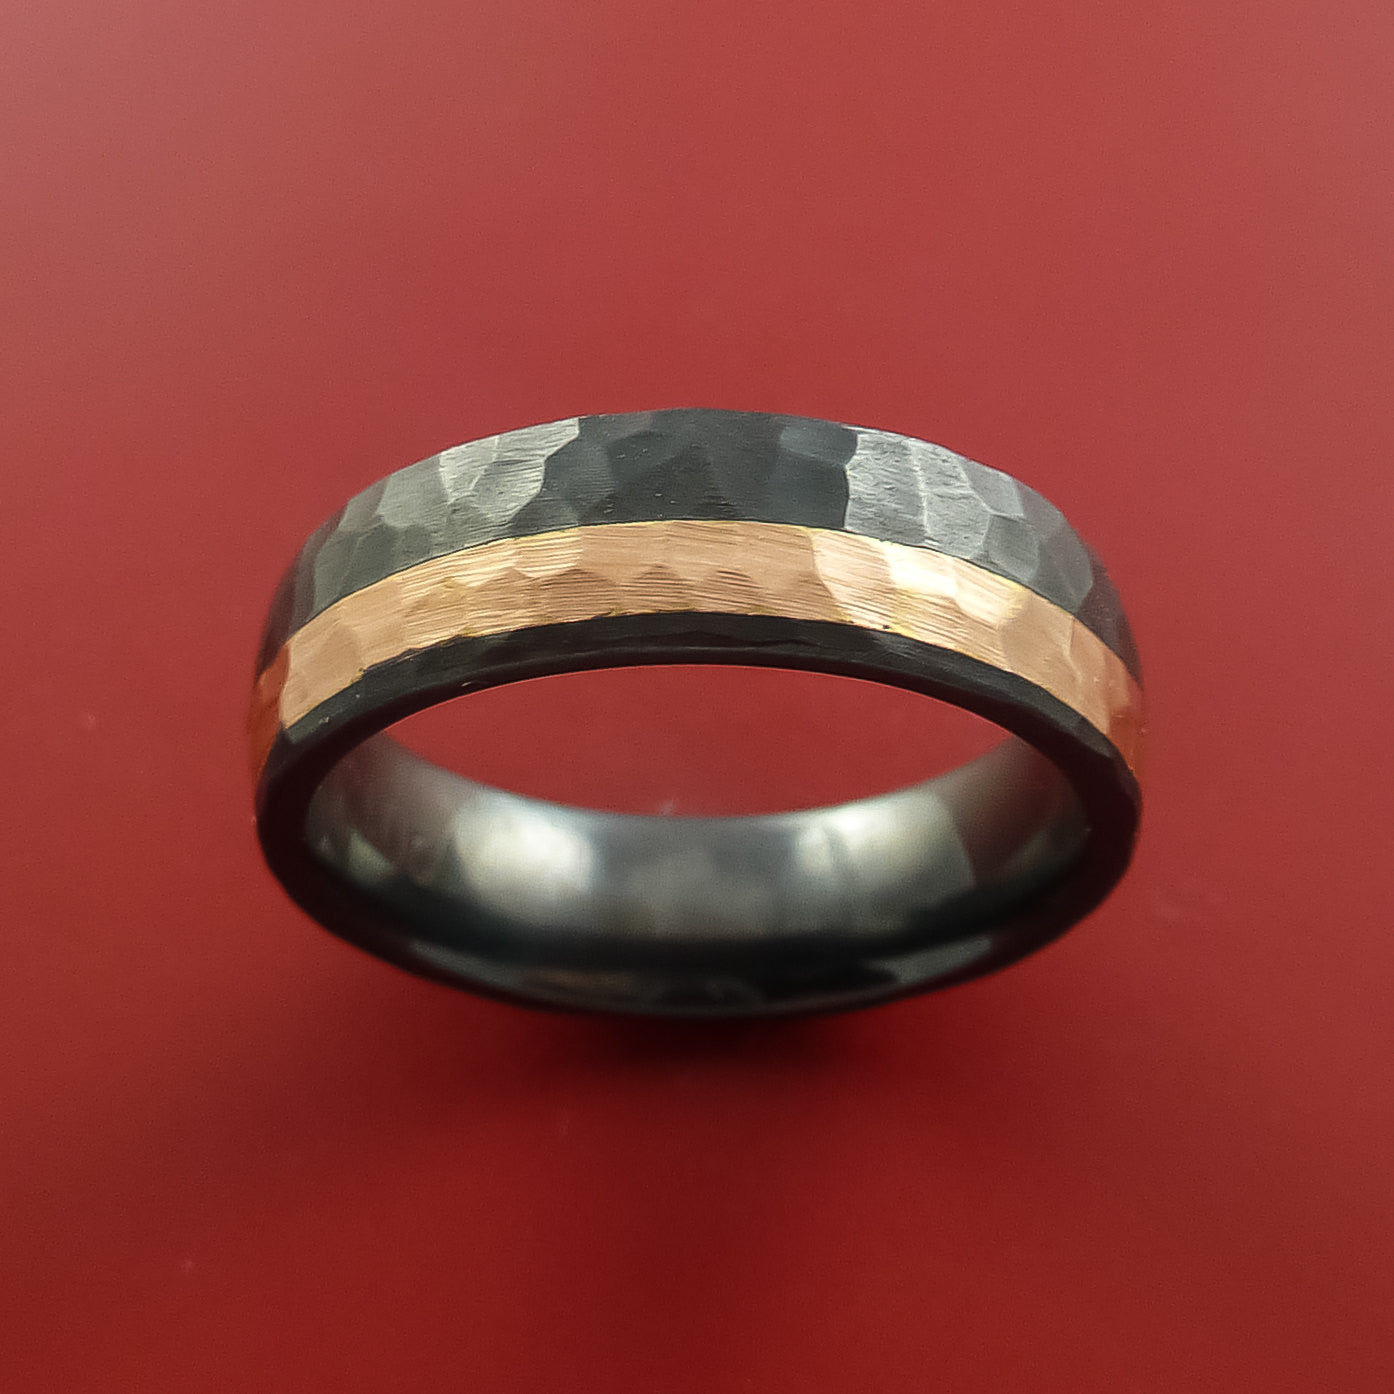 Hammered Black Zirconium Ring with 14k Rose Gold Inlay